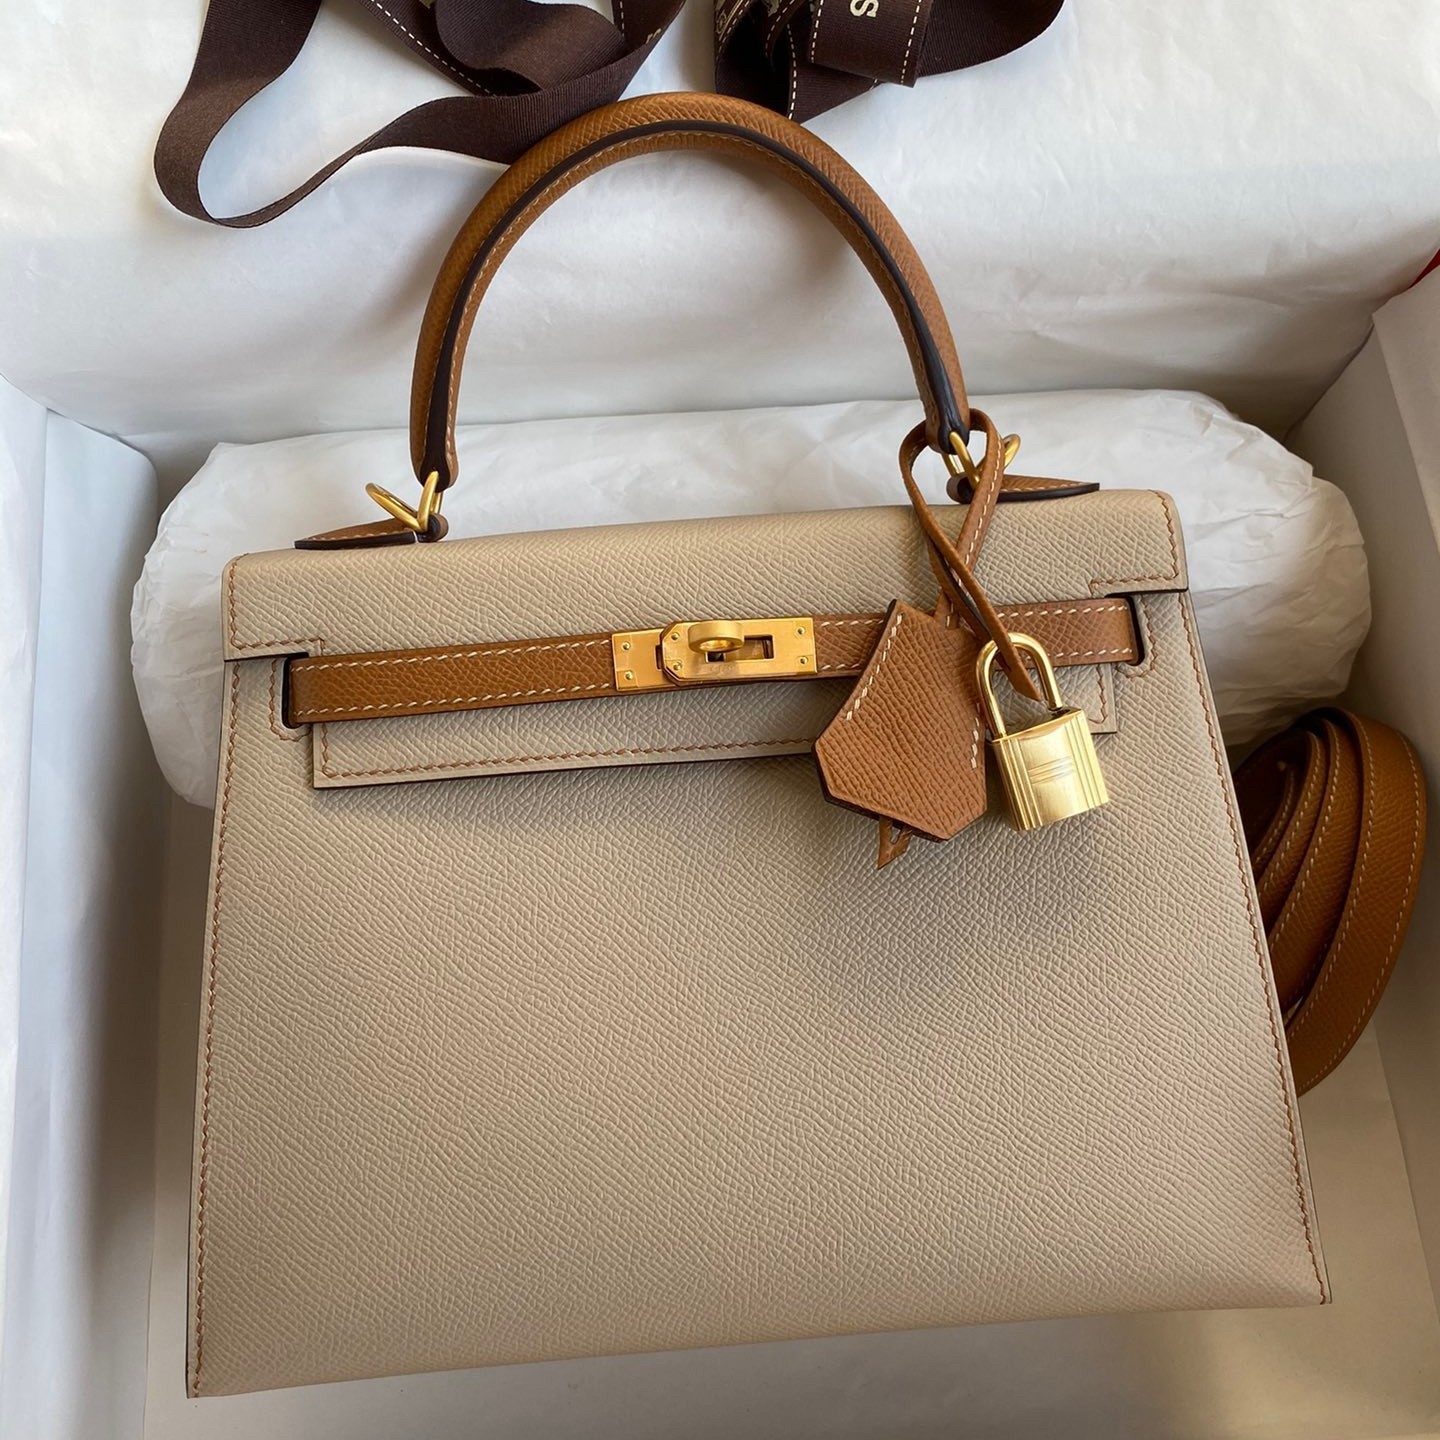 Replica Hermes Kelly Sellier 25 Bicolor Bag in Trench and Gold Epsom ...